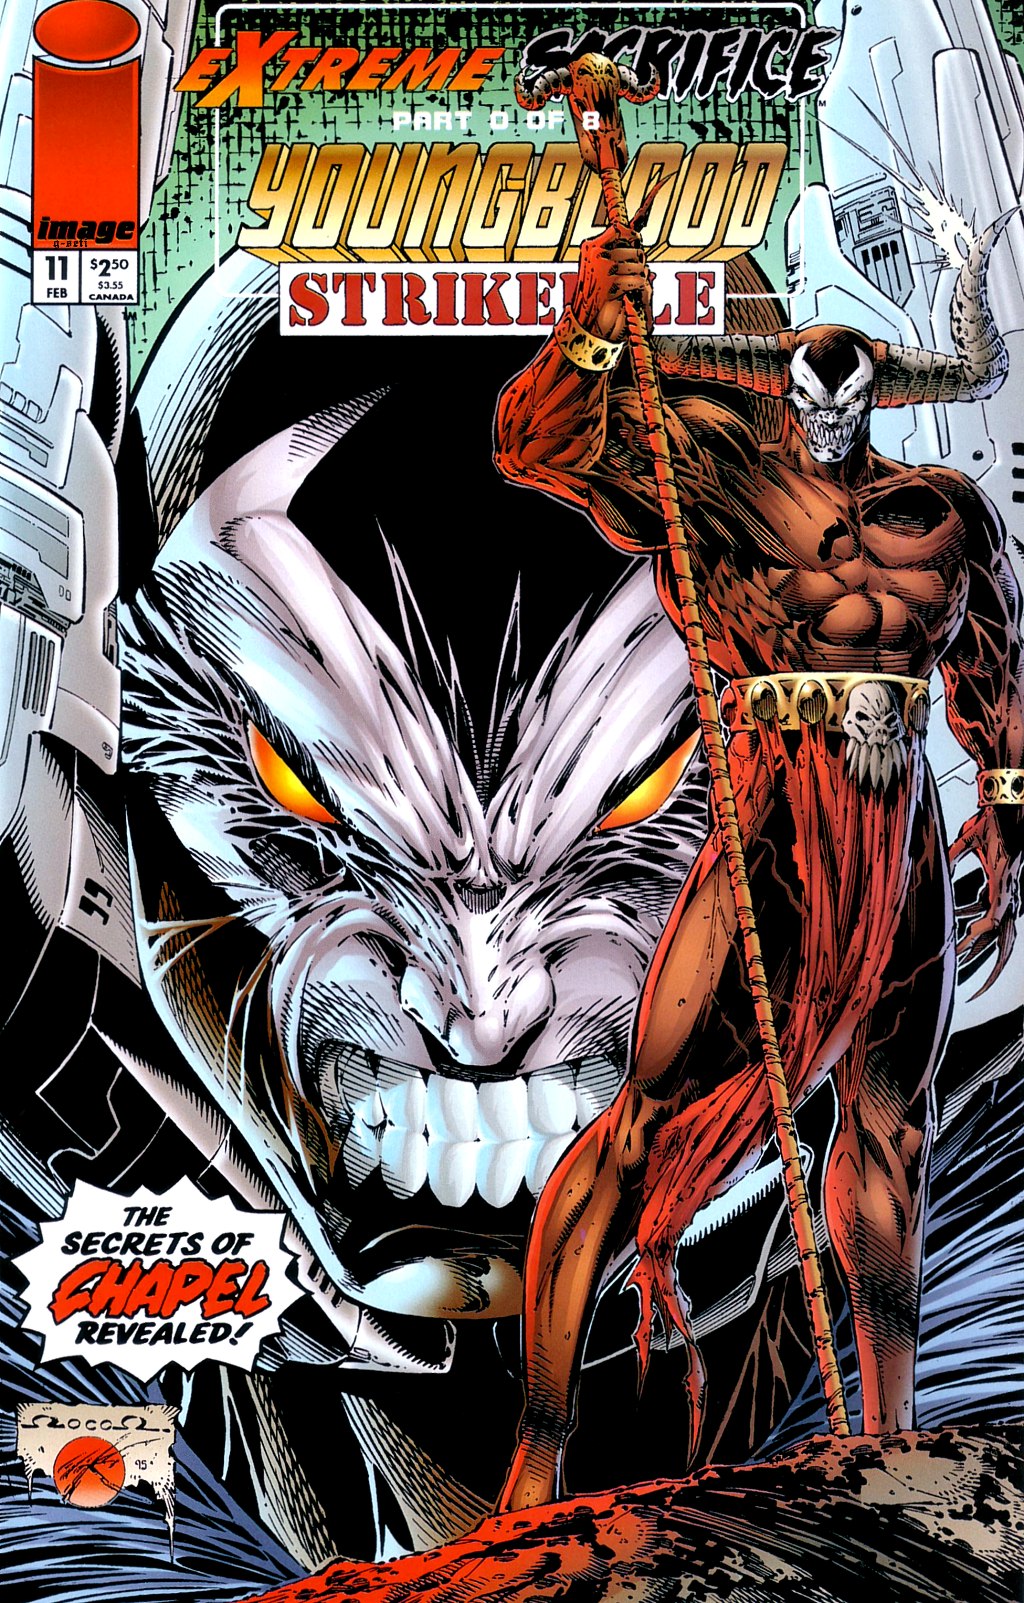 Read online Youngblood: Strikefile comic -  Issue #11 - 1